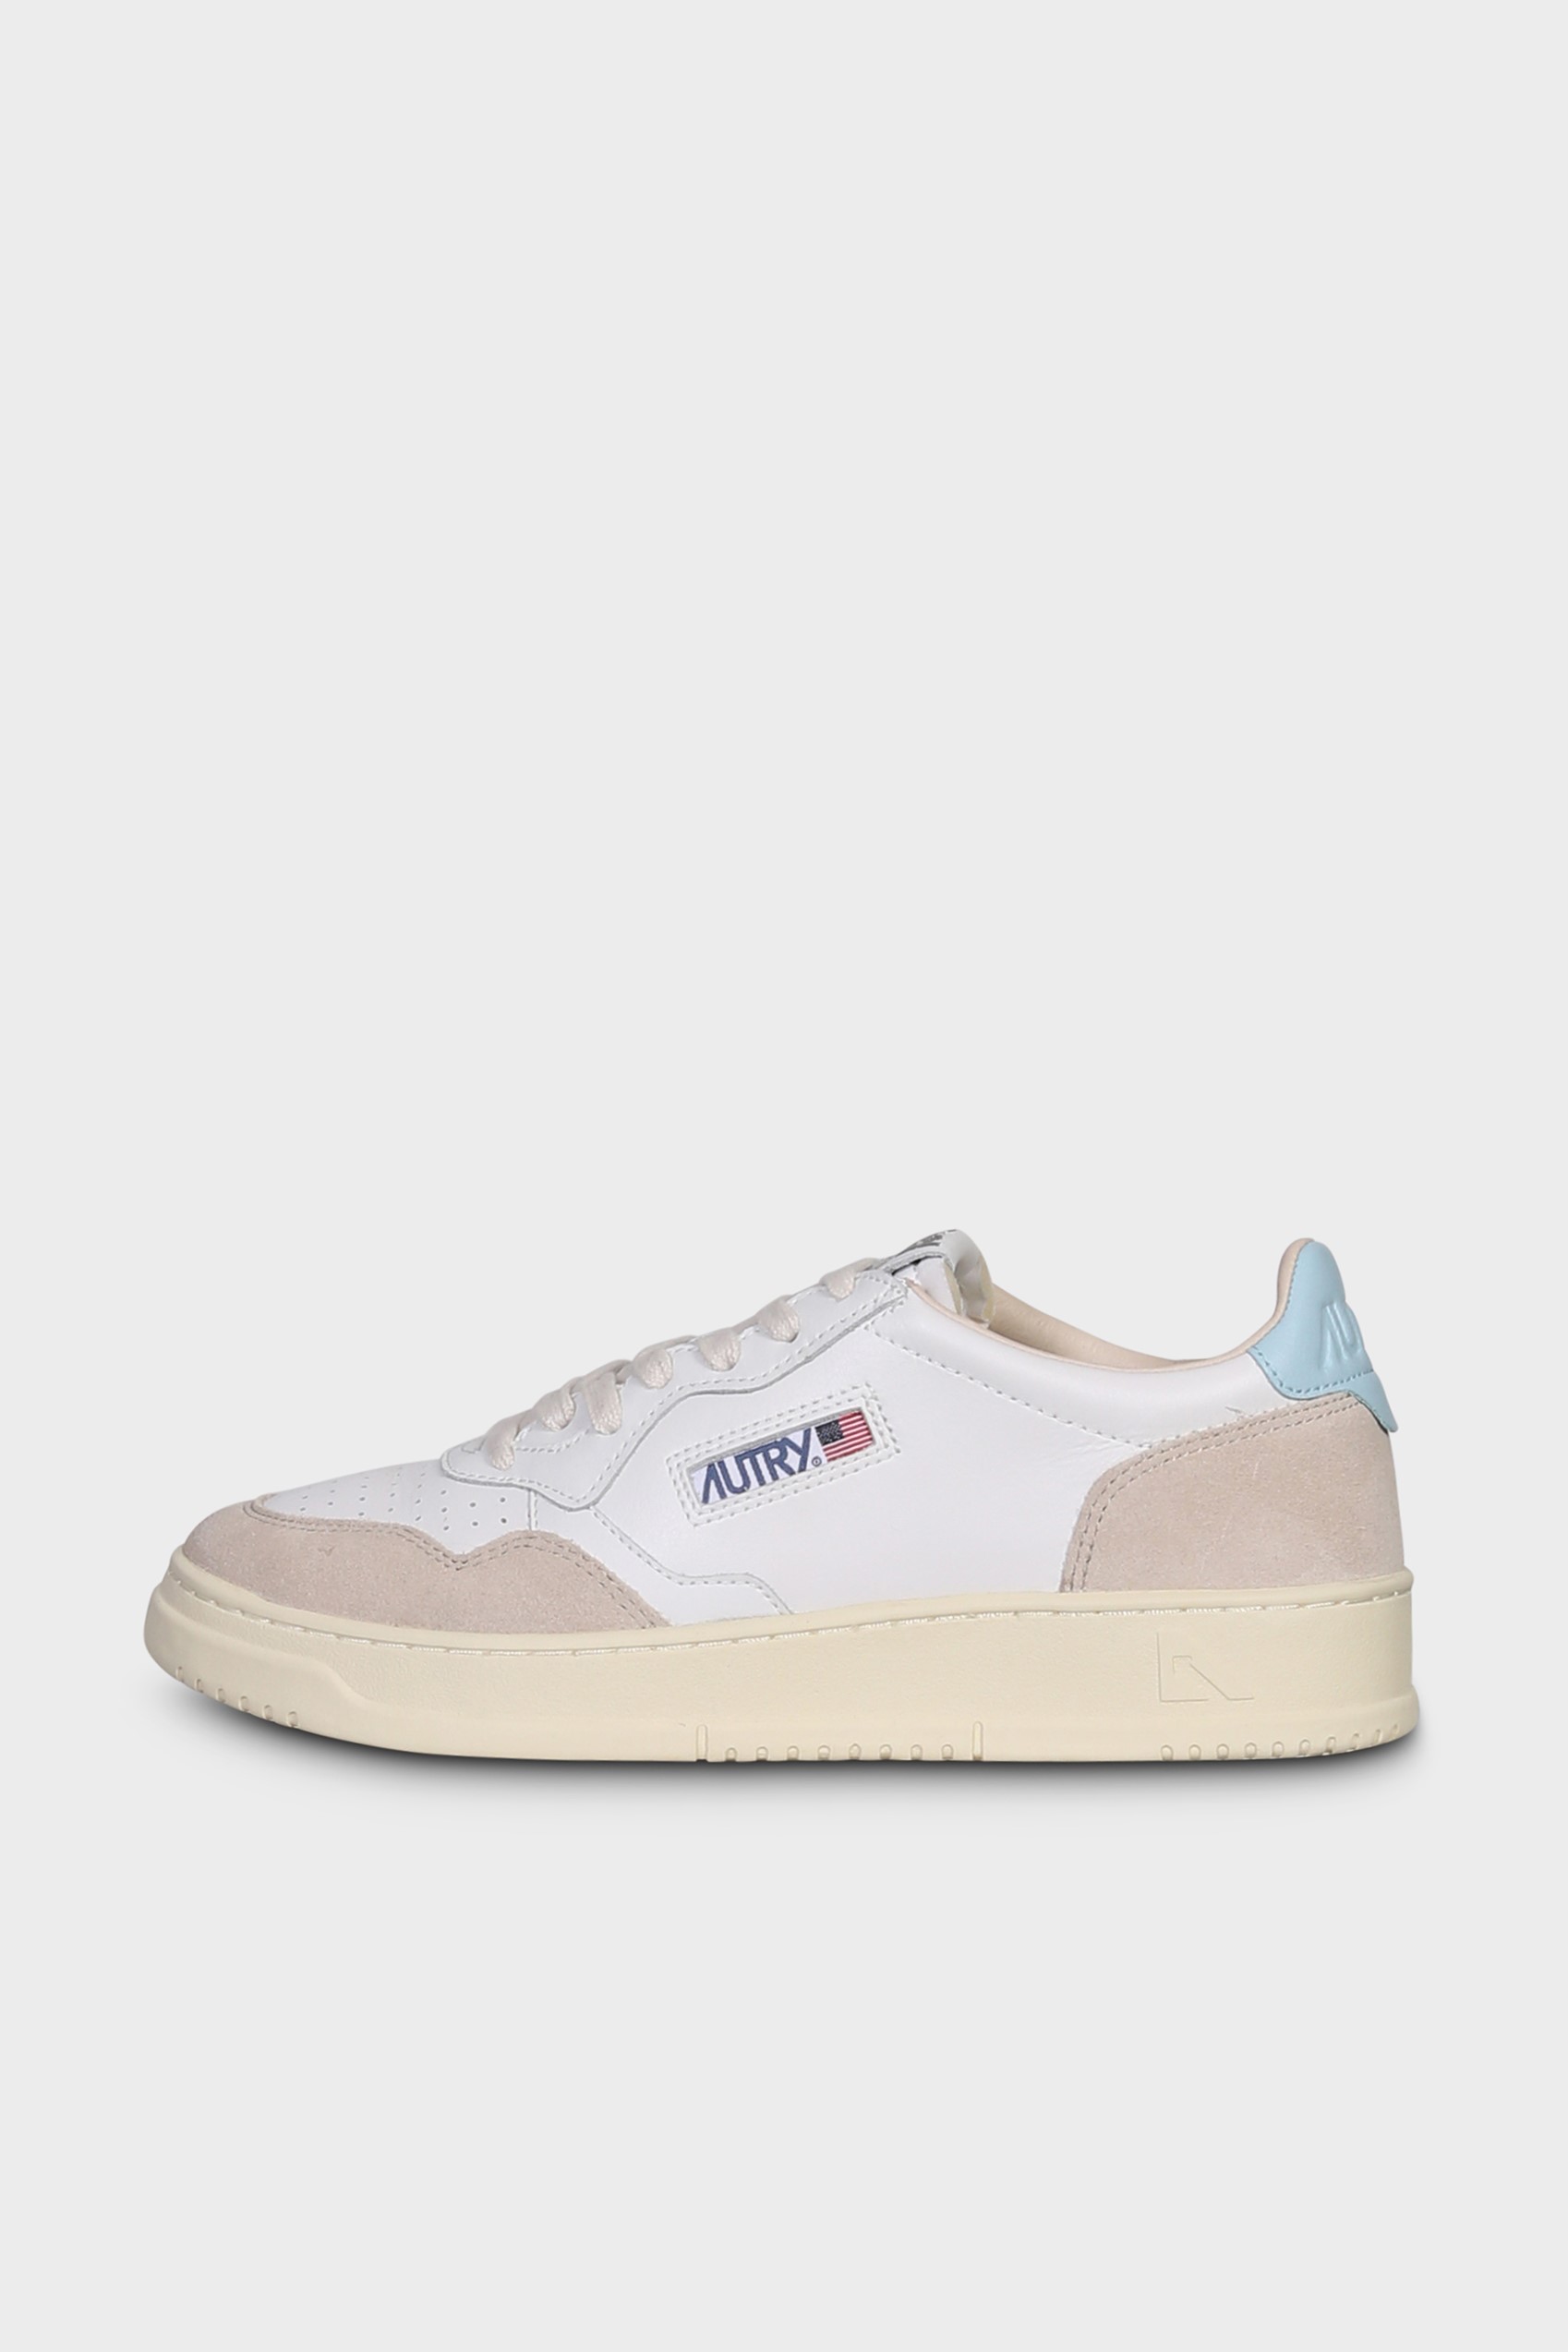 AUTRY ACTION SHOES Medalist Low Sneaker Suede White/Stream Blue 35